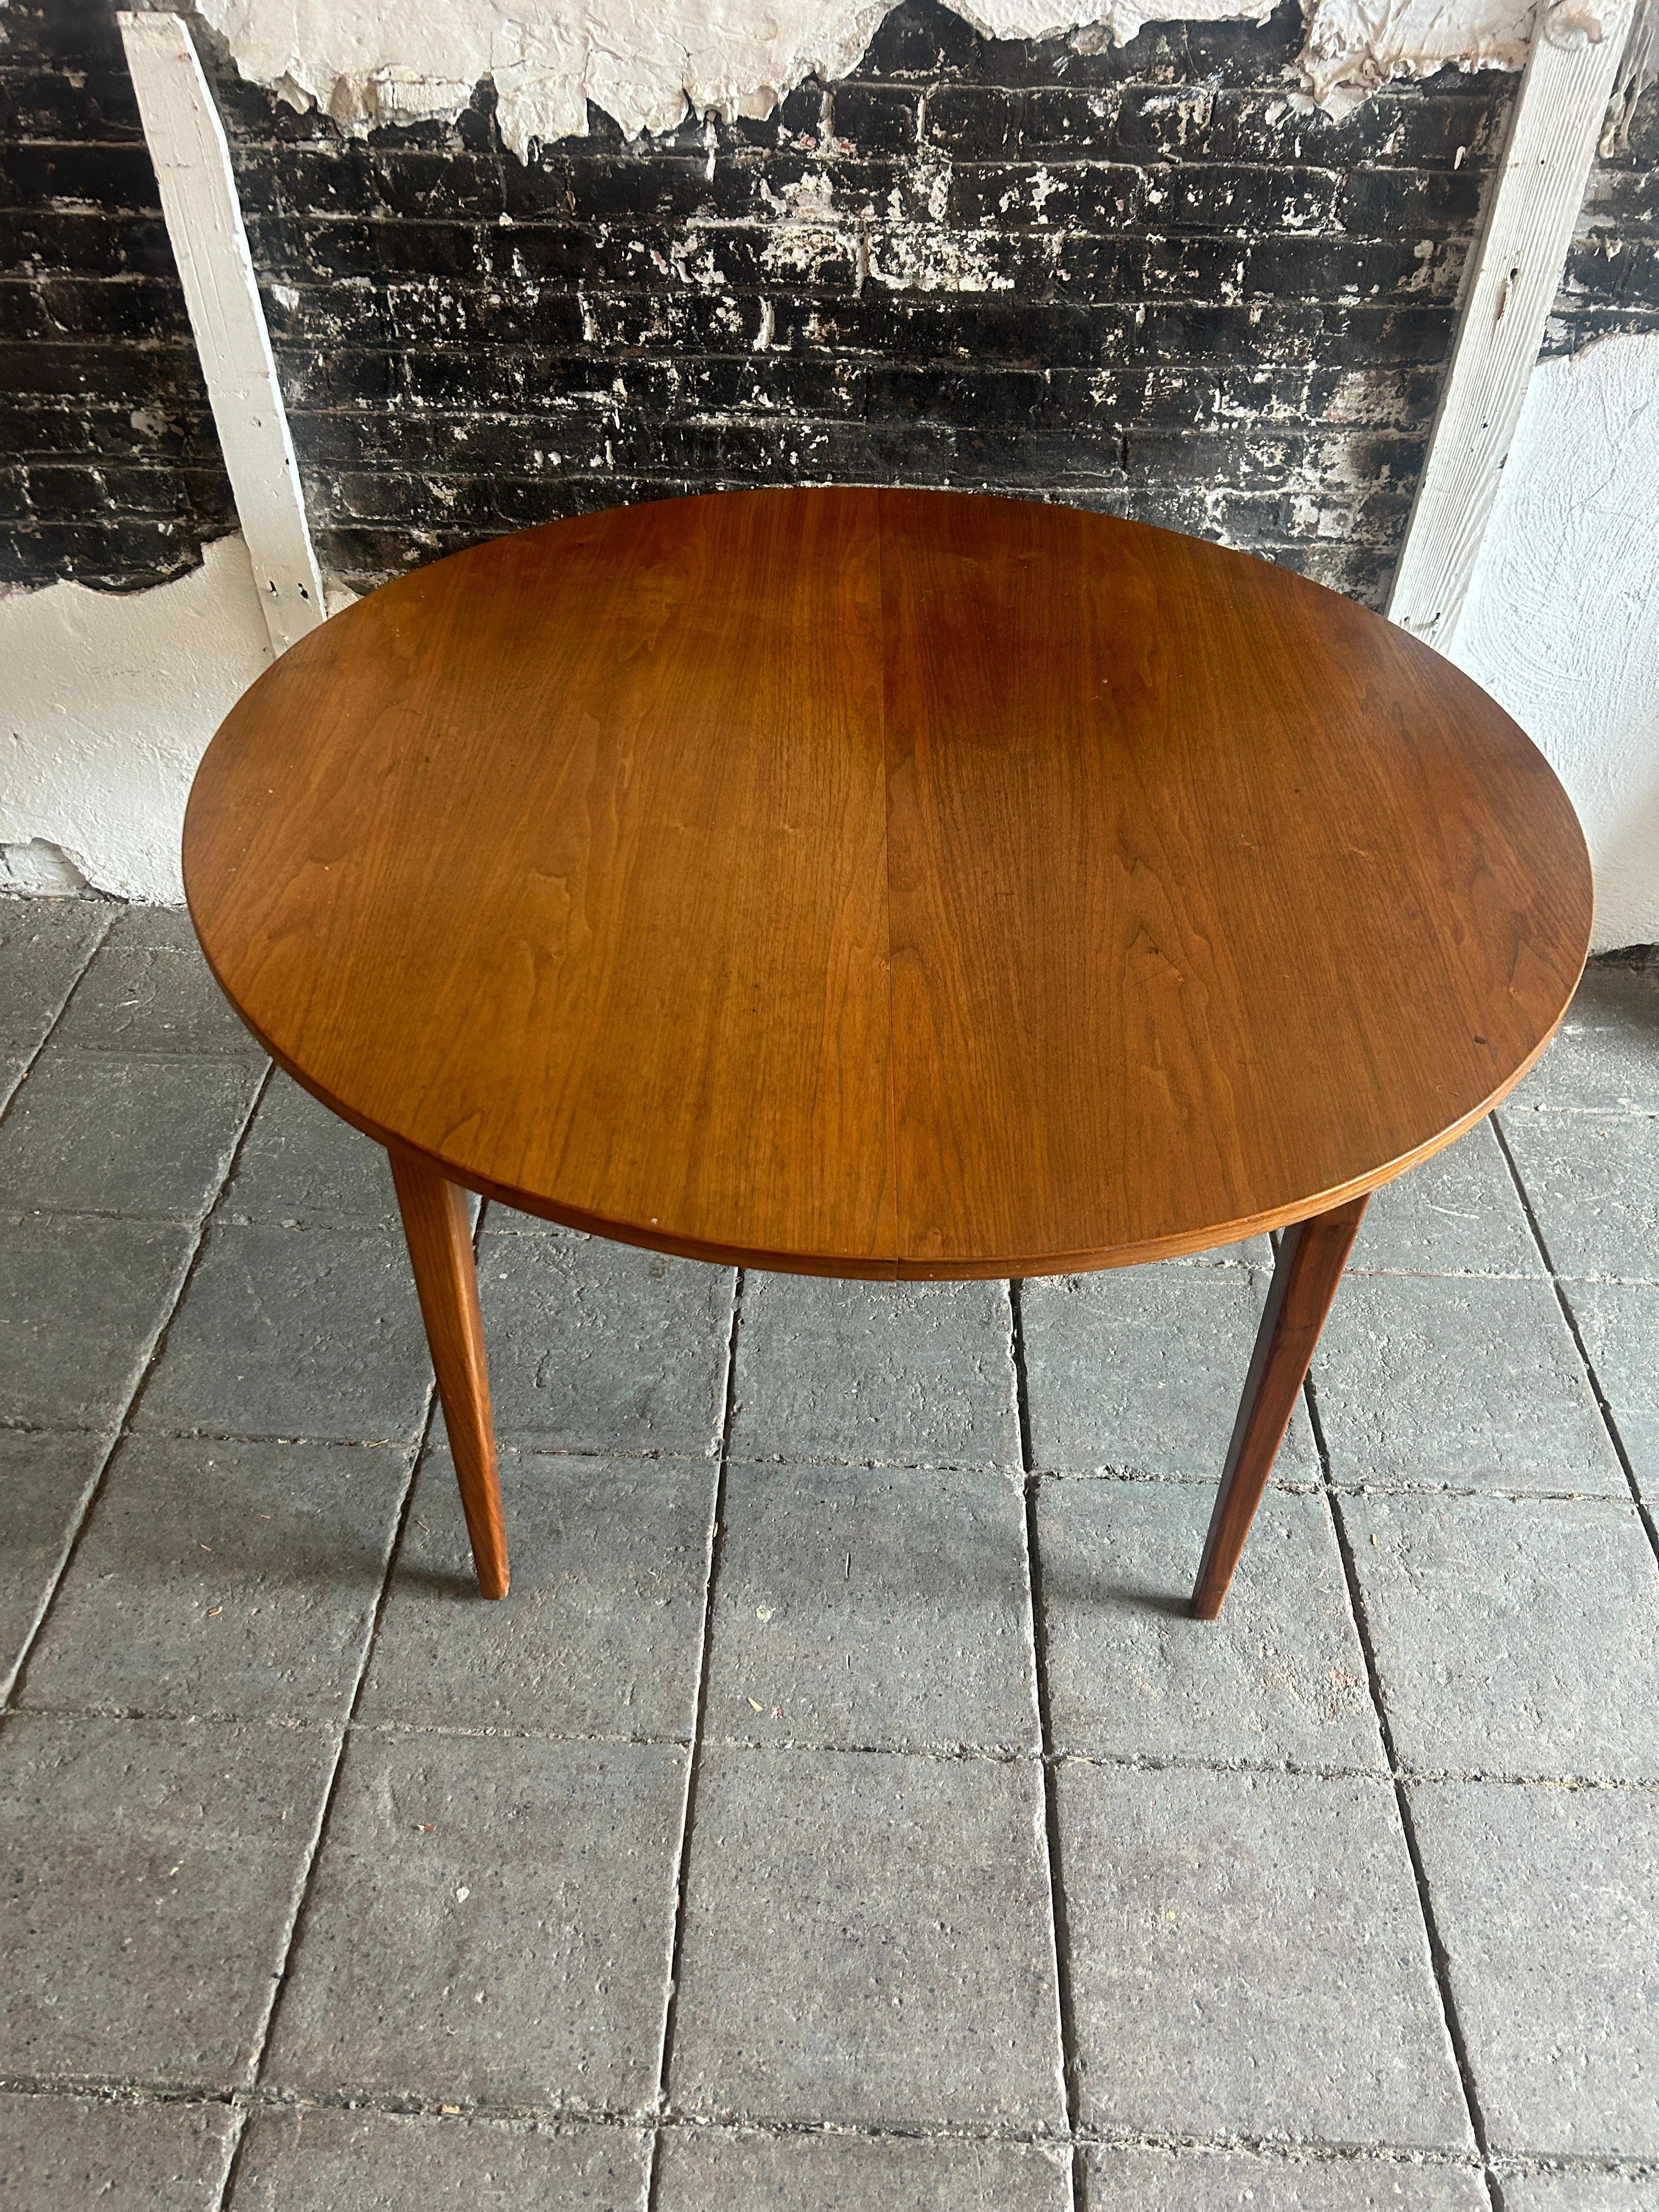 Mid century American walnut round dining table with 2 leaves. All wood table and extension glides circa 1960. The table is 45” in diameter with (2) 15” leaves. Table and leaves match very well. Great sturdy American mid century dining table. Legs